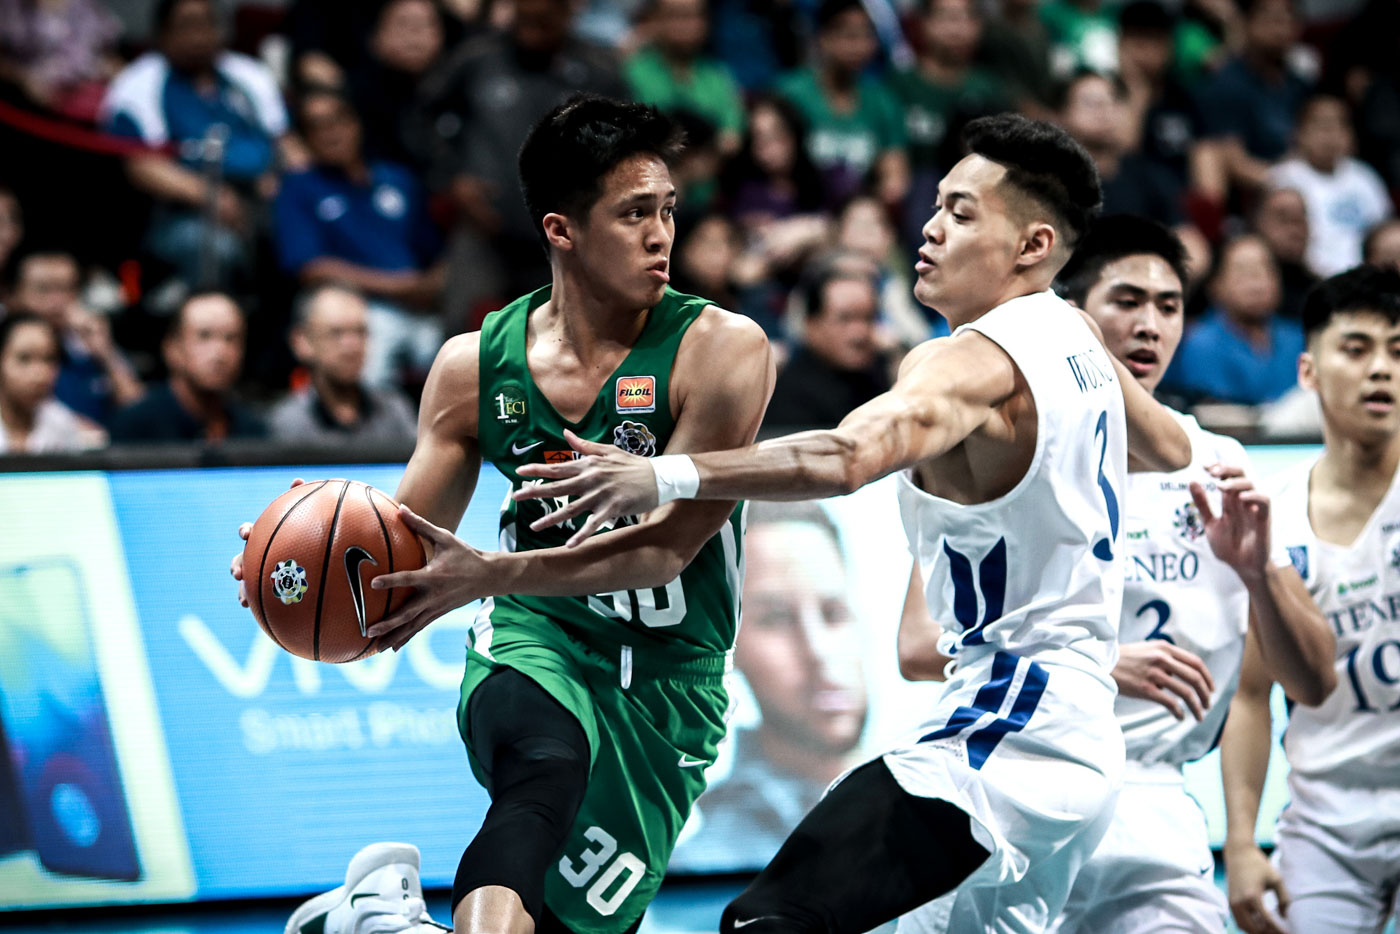 BLOCKBUSTER BOUT. Another chapter will be added to the Ateneo-La Salle rivalry this weekend. Photo by Michael Gatpandan/Rappler  